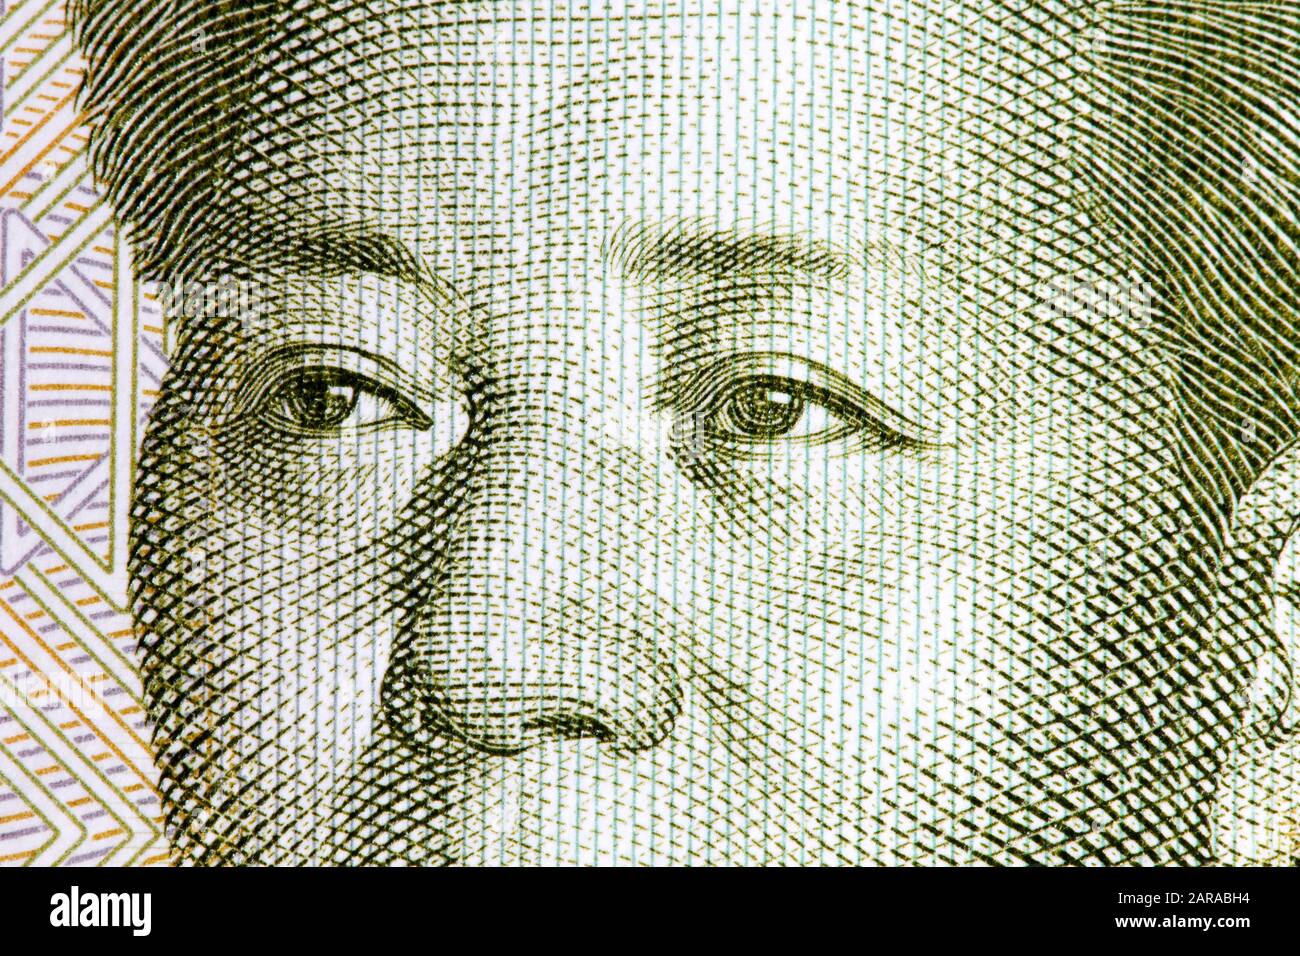 Eyes of the chairman Mao fron one yuan banknote on macro. Stock Photo